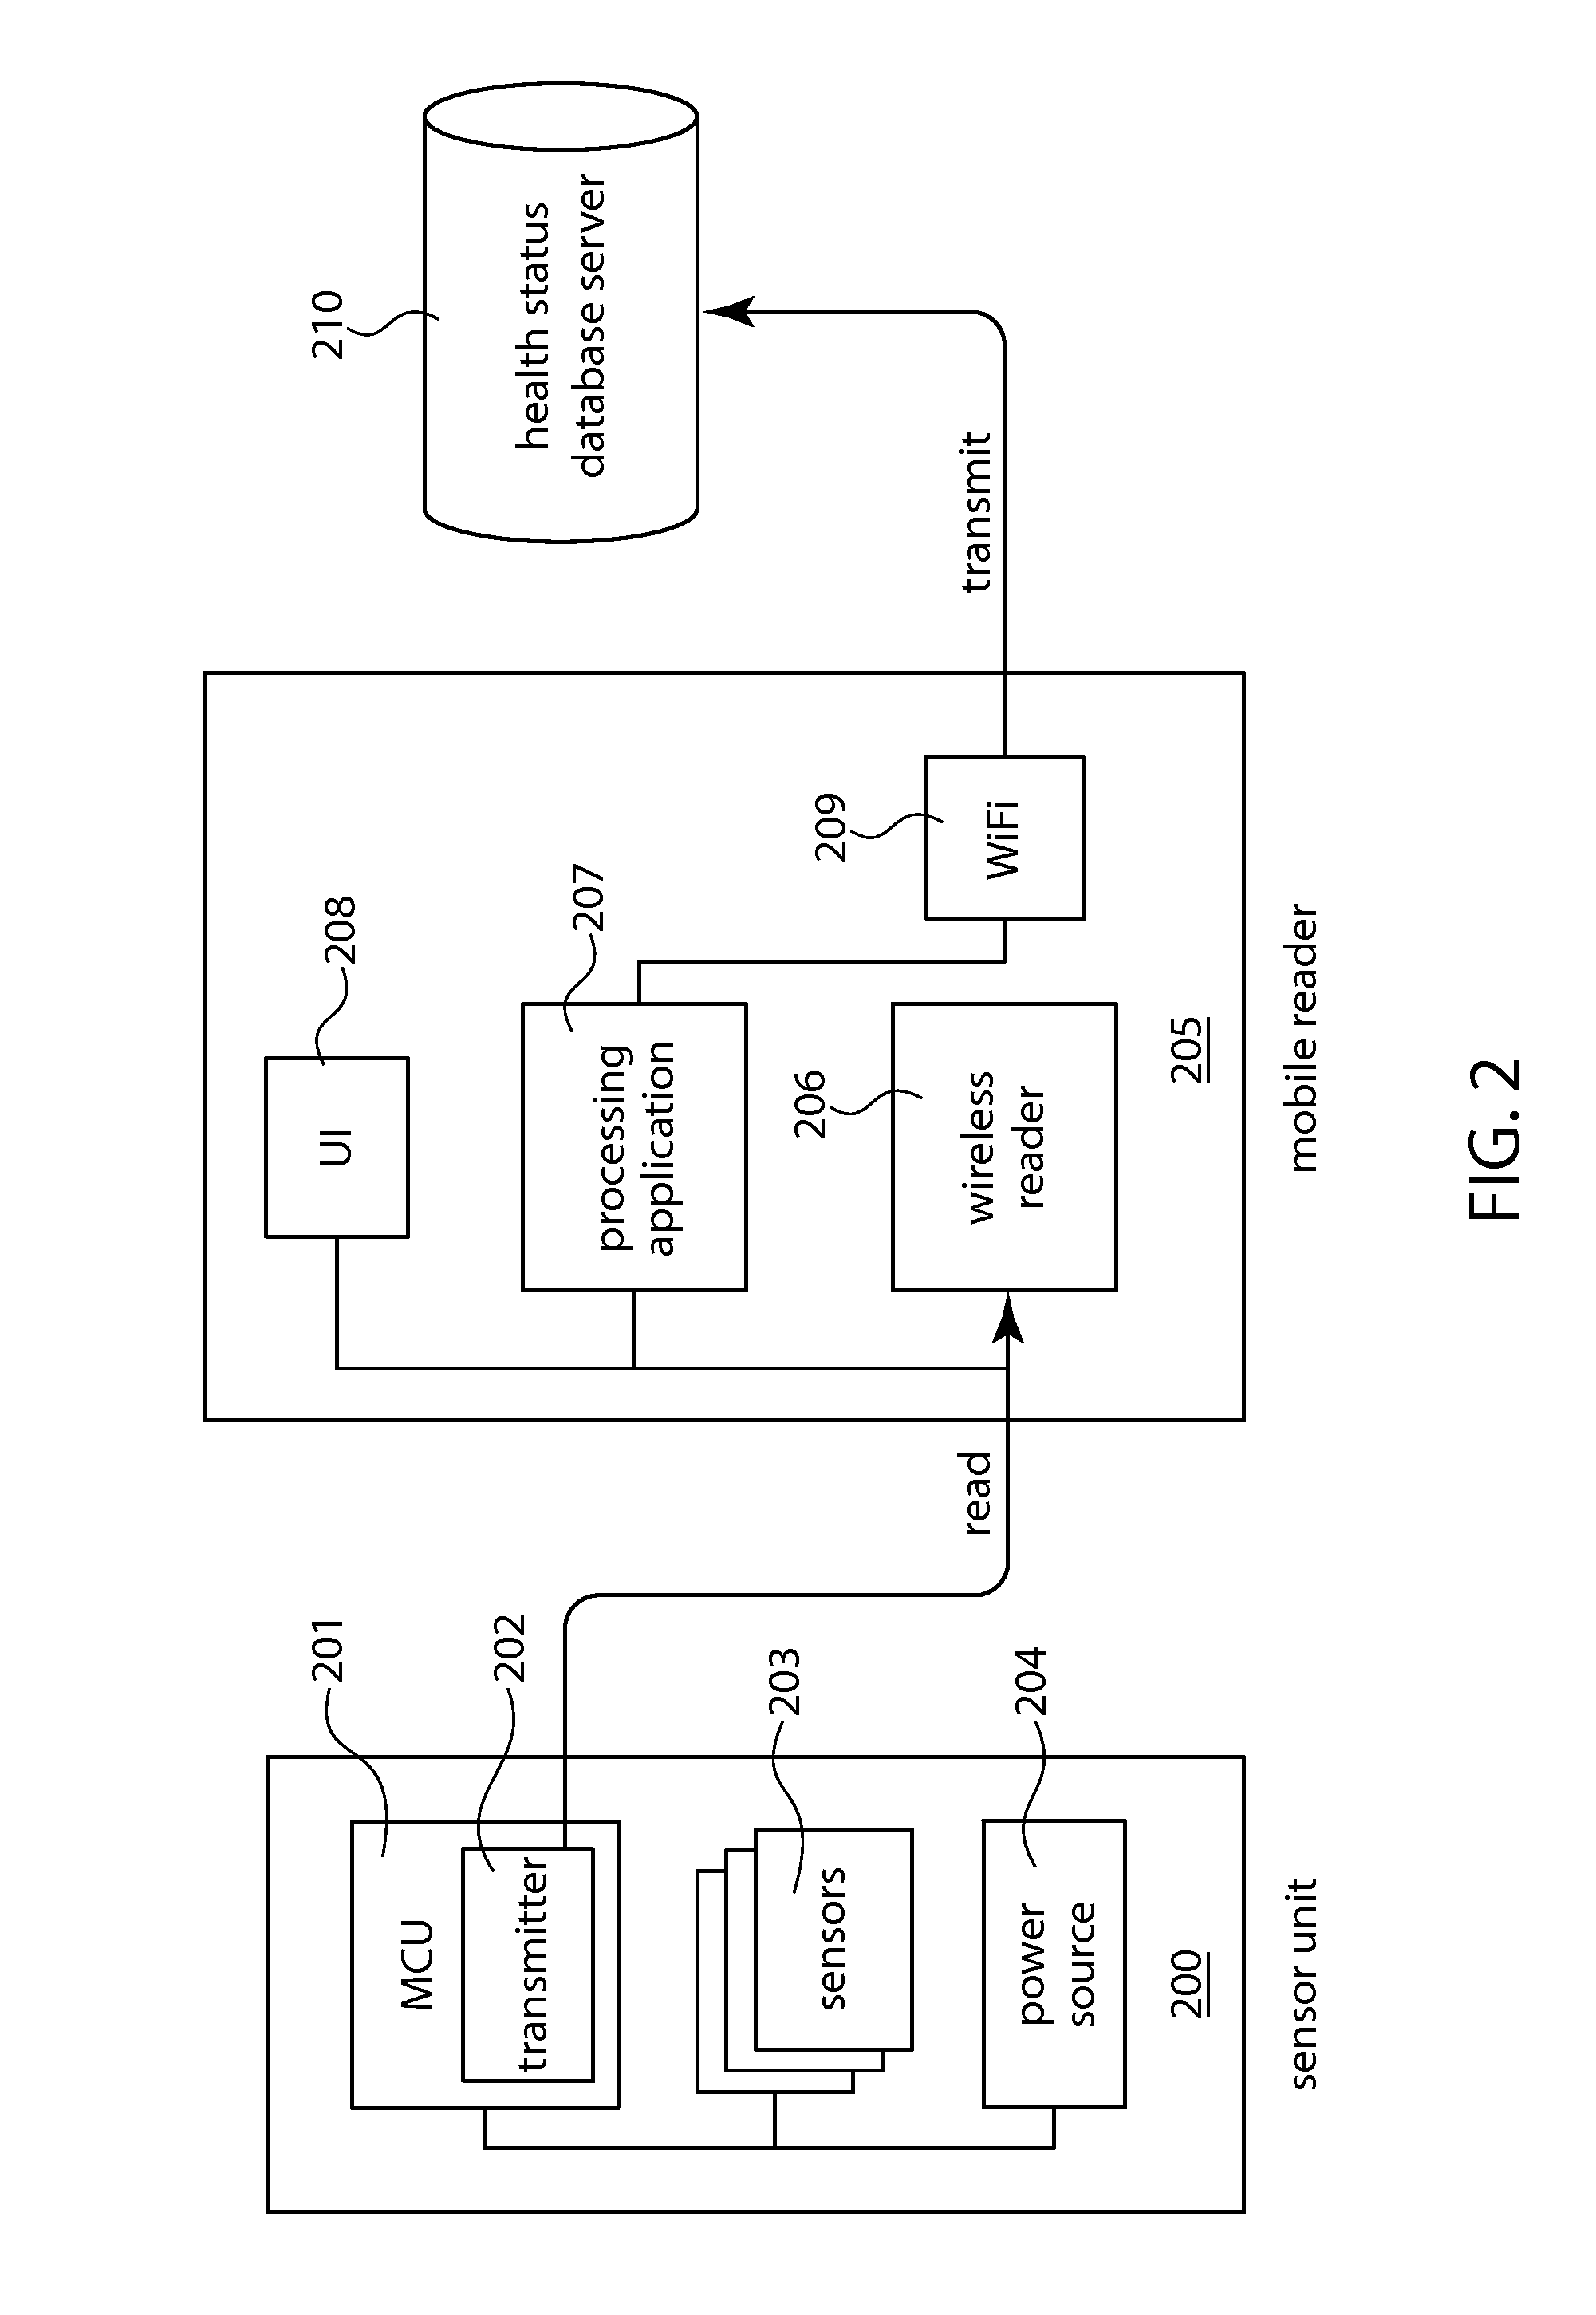 Method and system of continuous monitoring of body sounds via wearable wireless body sound monitor